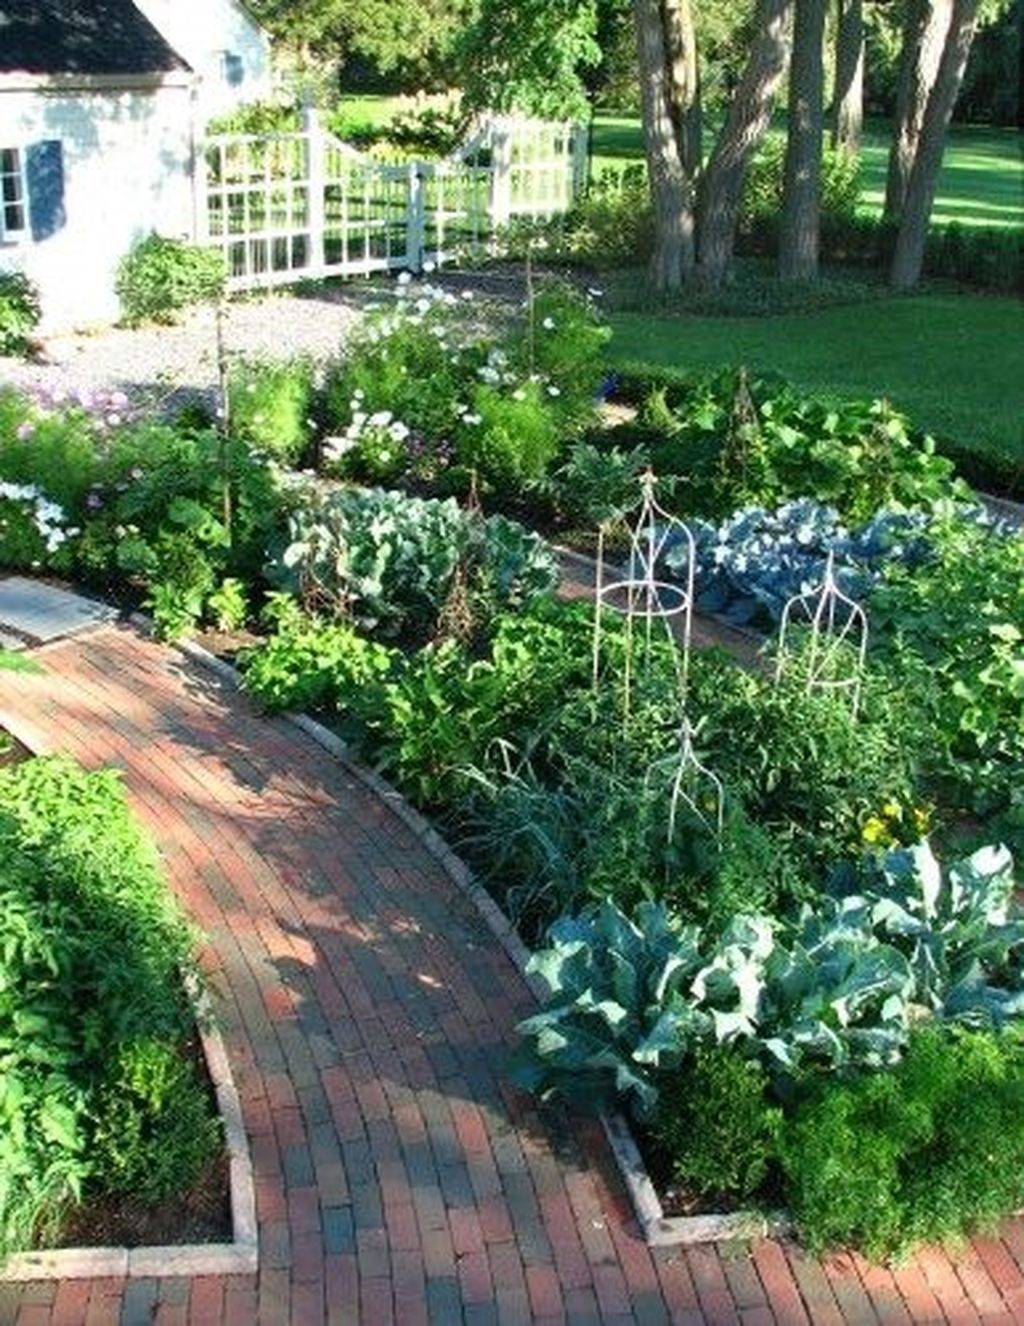 A Raised Vegetable Garden Bed